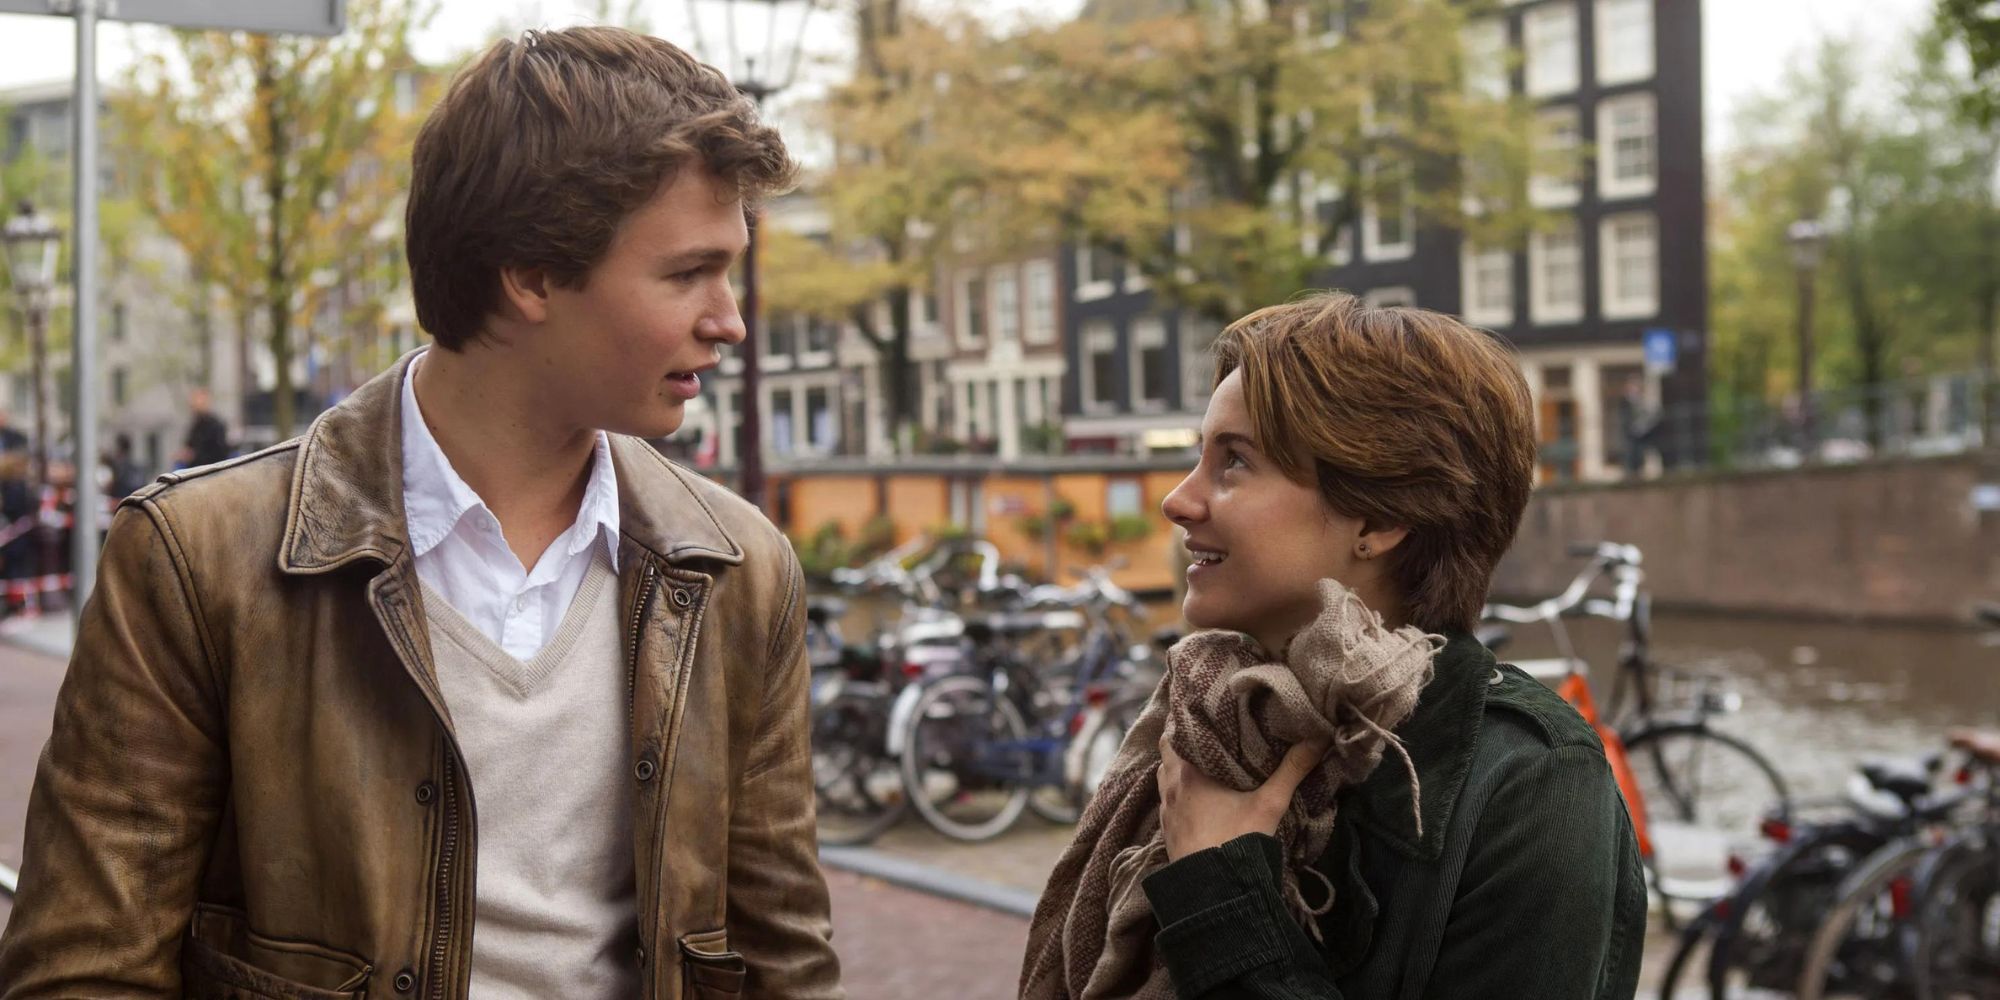 Ansel Elgort as Augustus and Shailene Woodley as Hazel from The Fault In Our Stars talking to each other